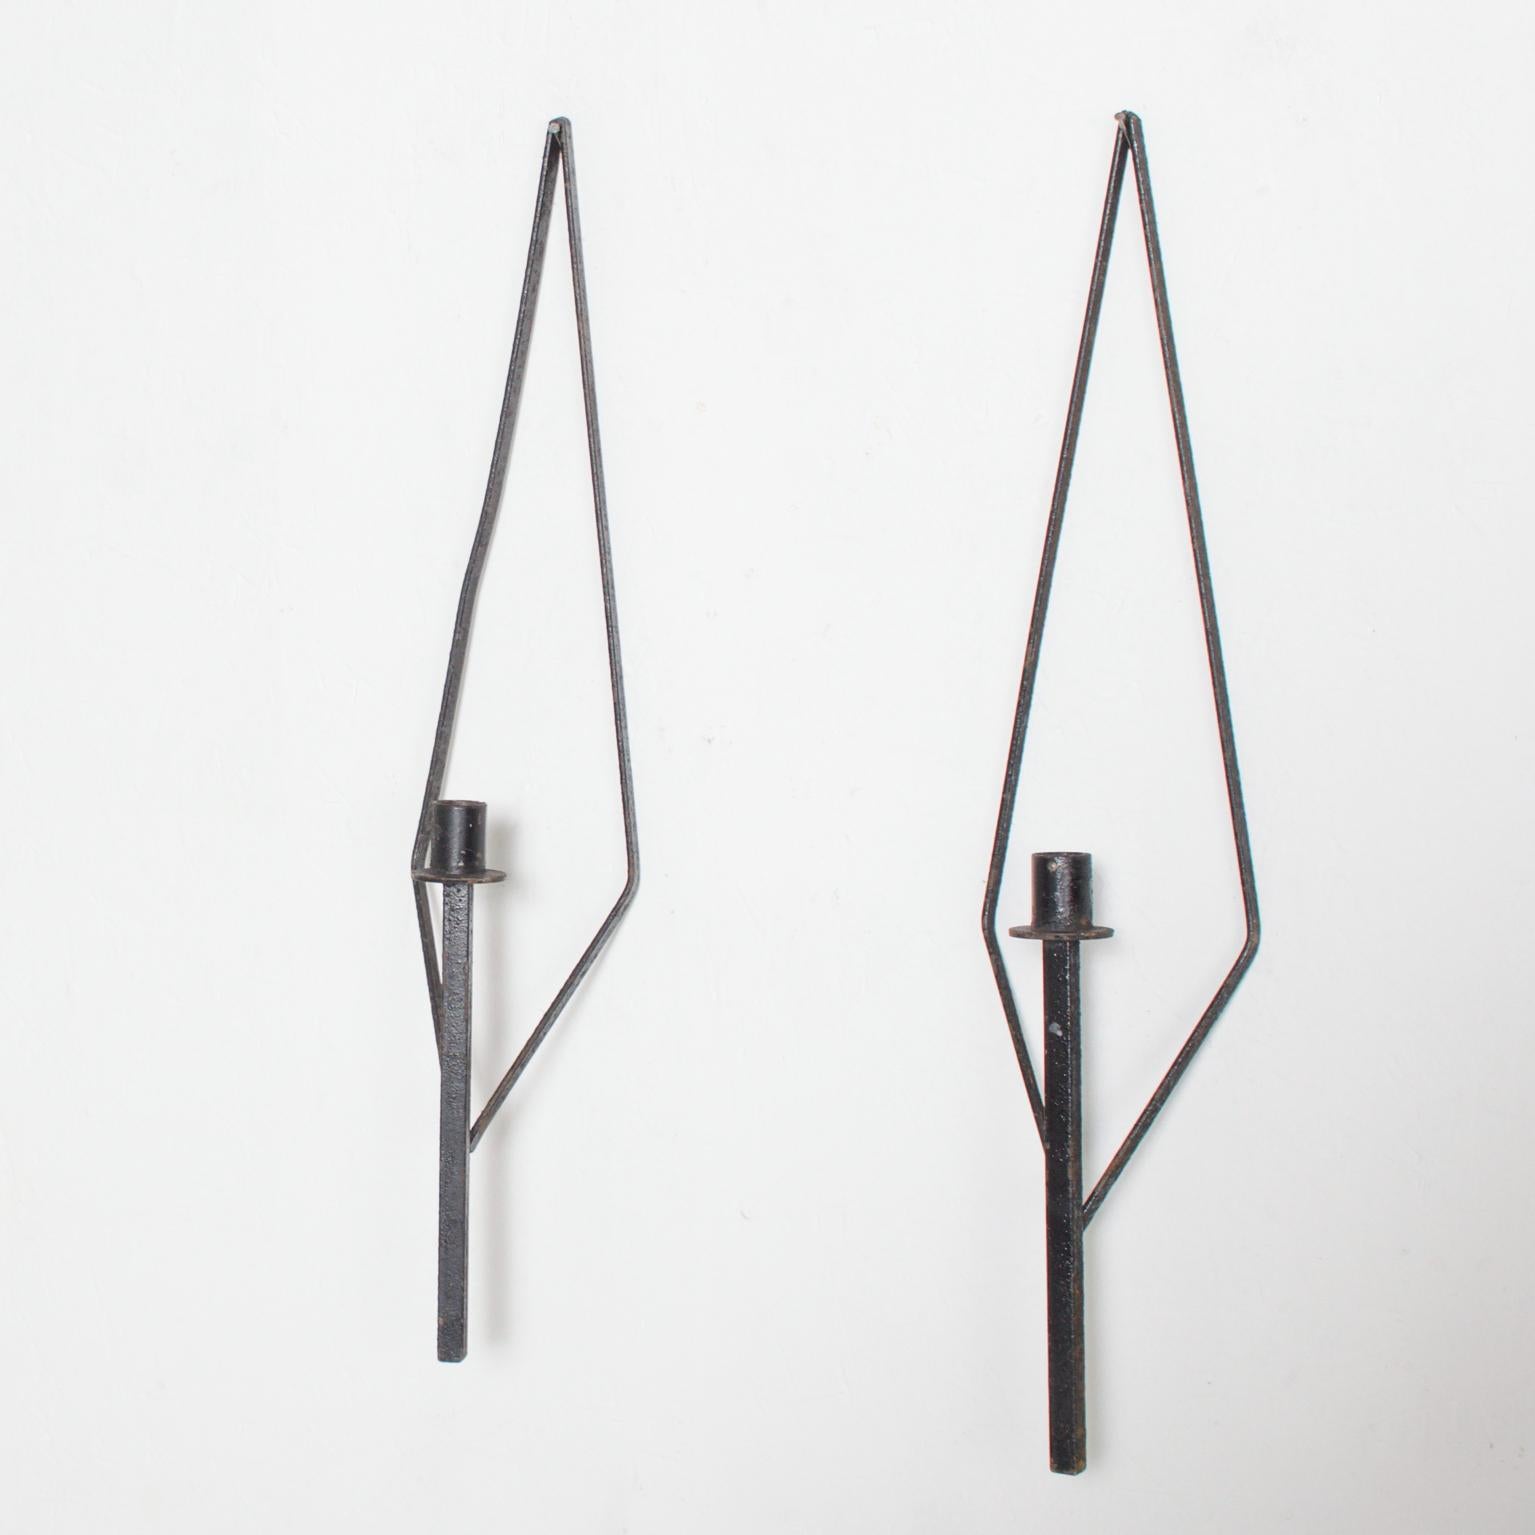 For your pleasure: Pair of vintage modern iron candleholders, wall sconce. Dimensions: 23 1/4